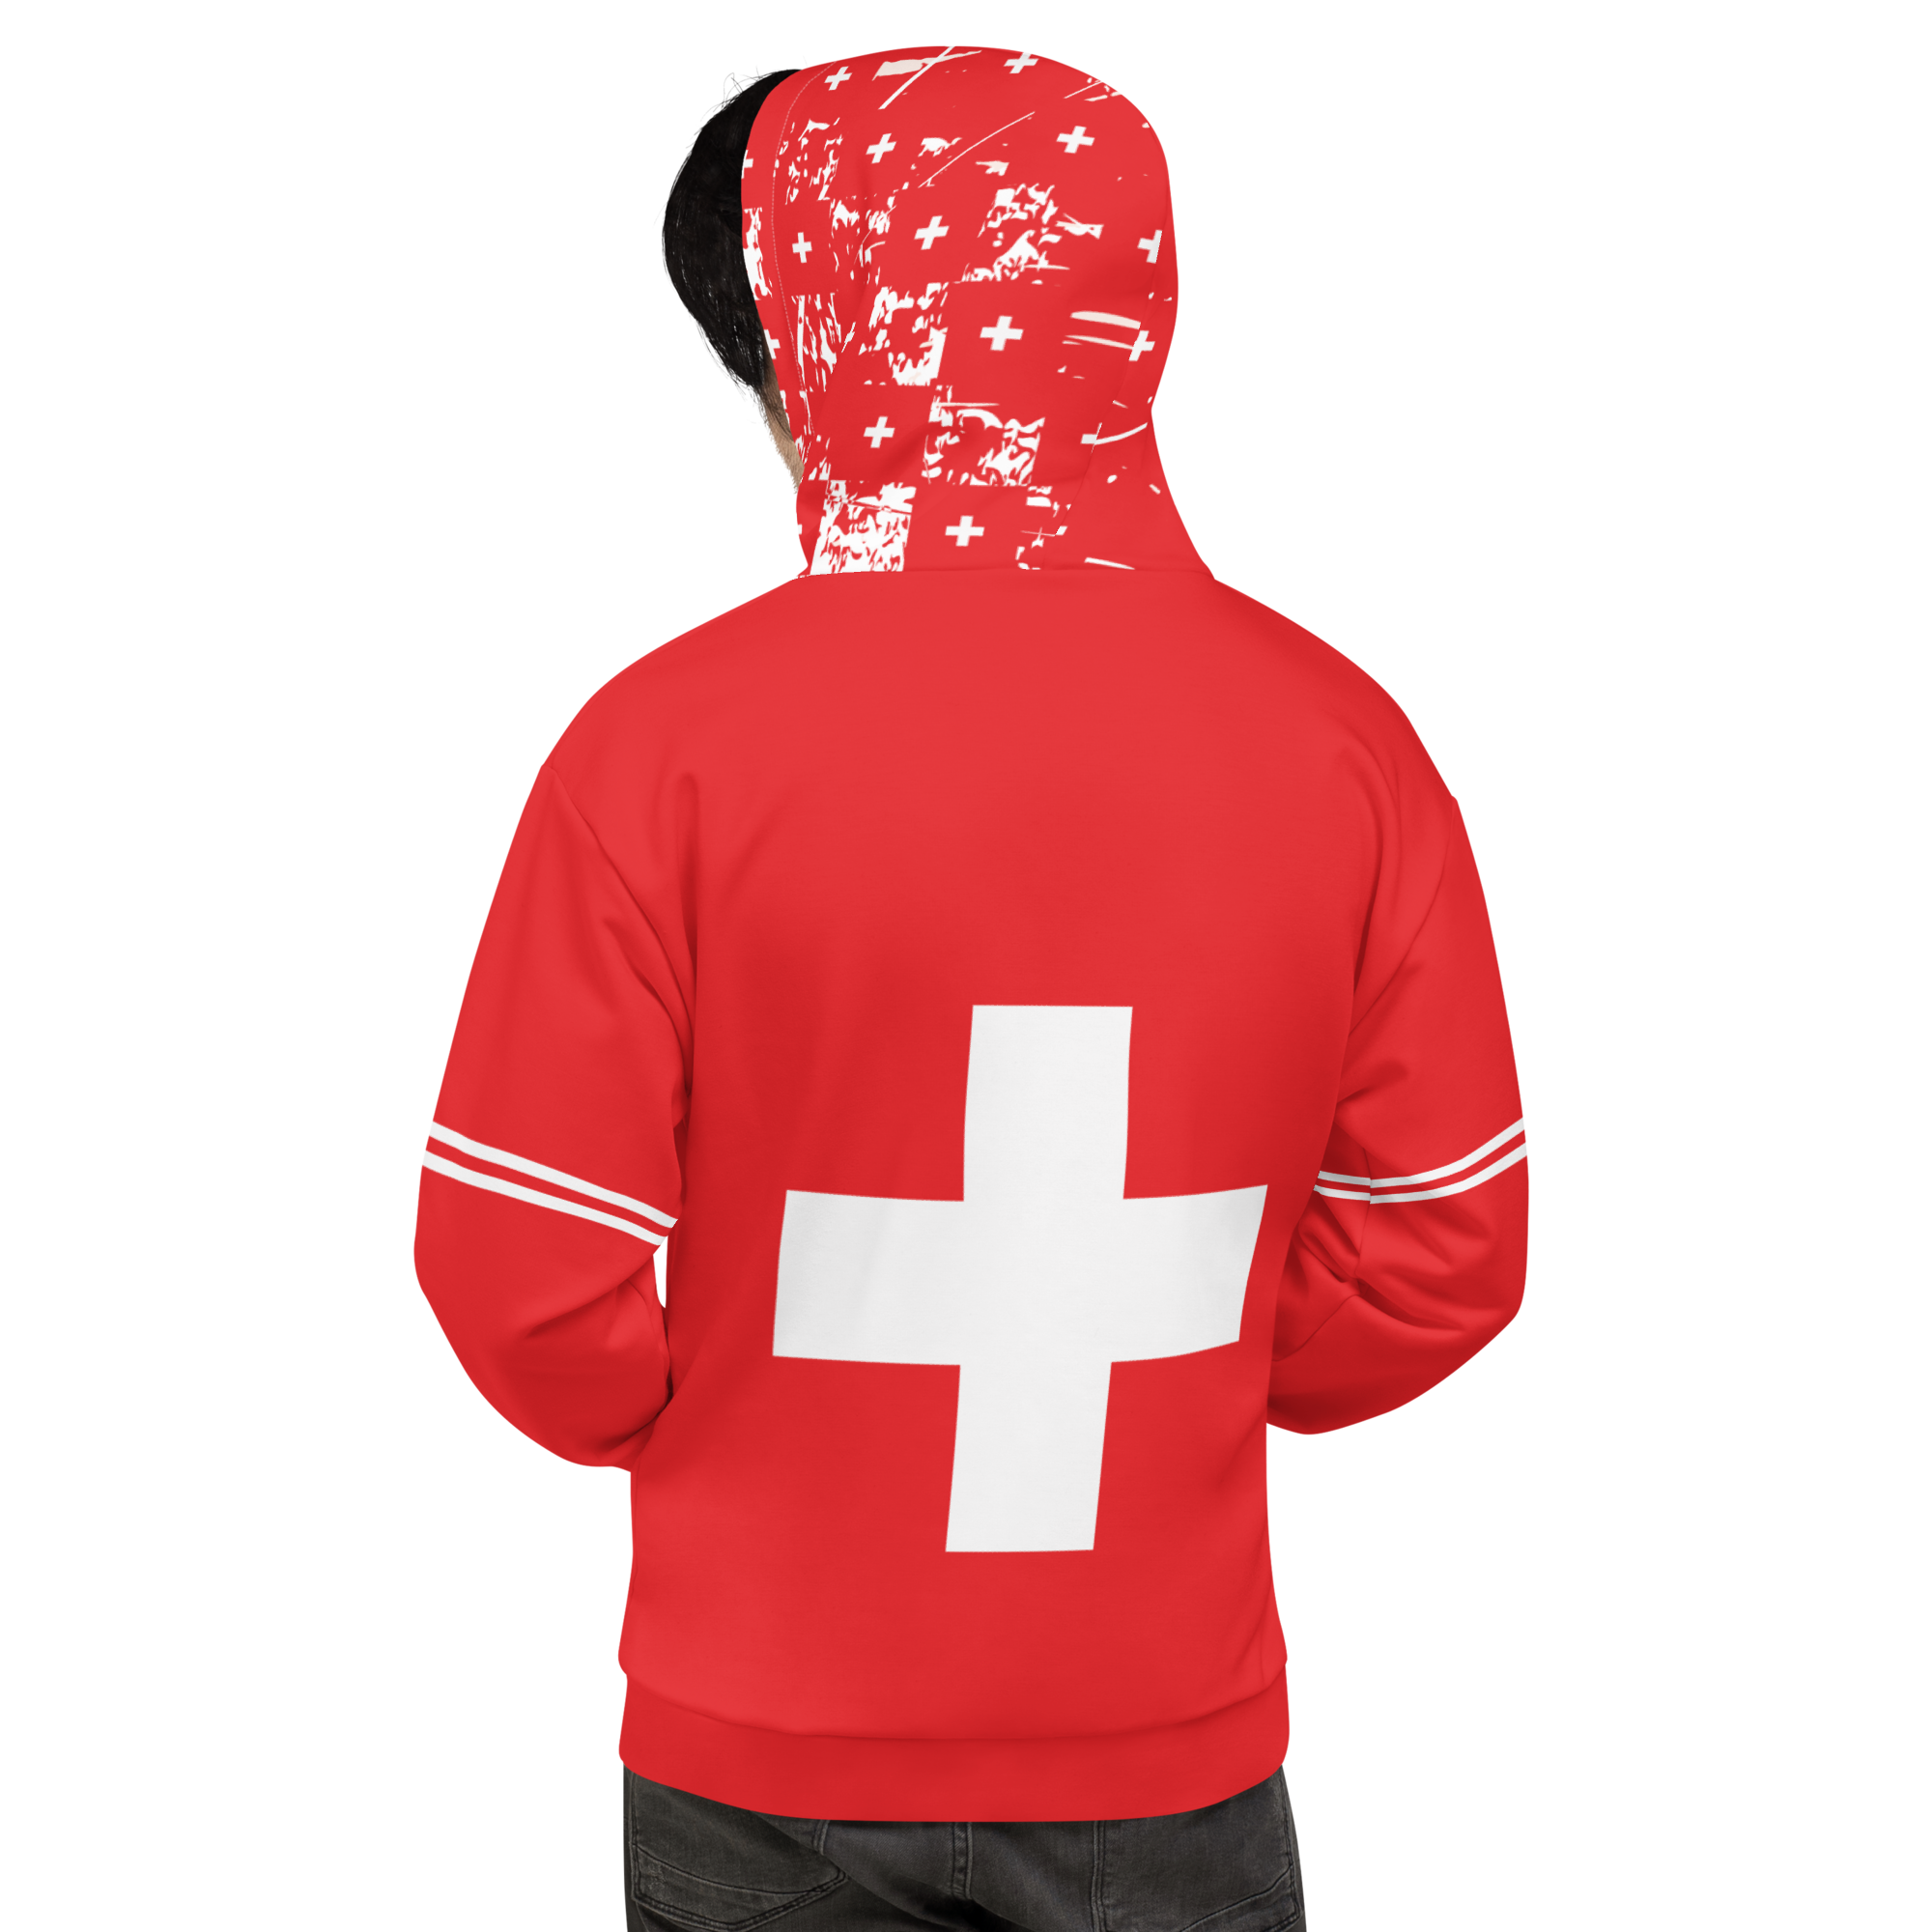 My colorful Switzerland flag inspired unisex oversized volleyball team hoodies by Volleybragswag are now sold on ETSY!